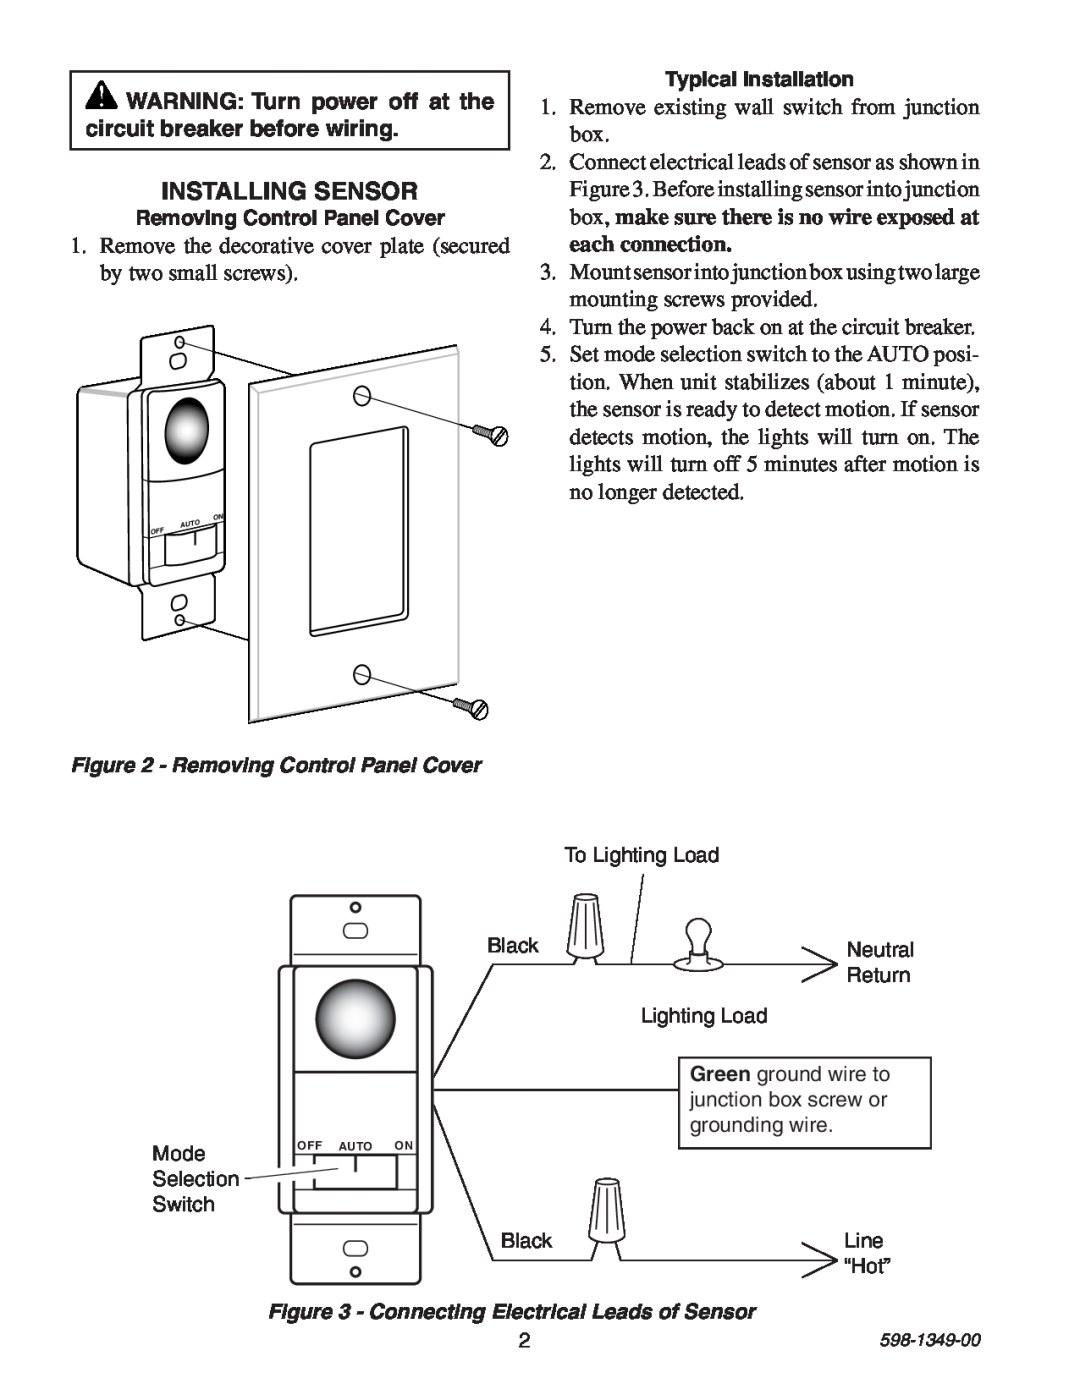 Heath Zenith 6103 manual Installing Sensor, Remove existing wall switch from junction box 